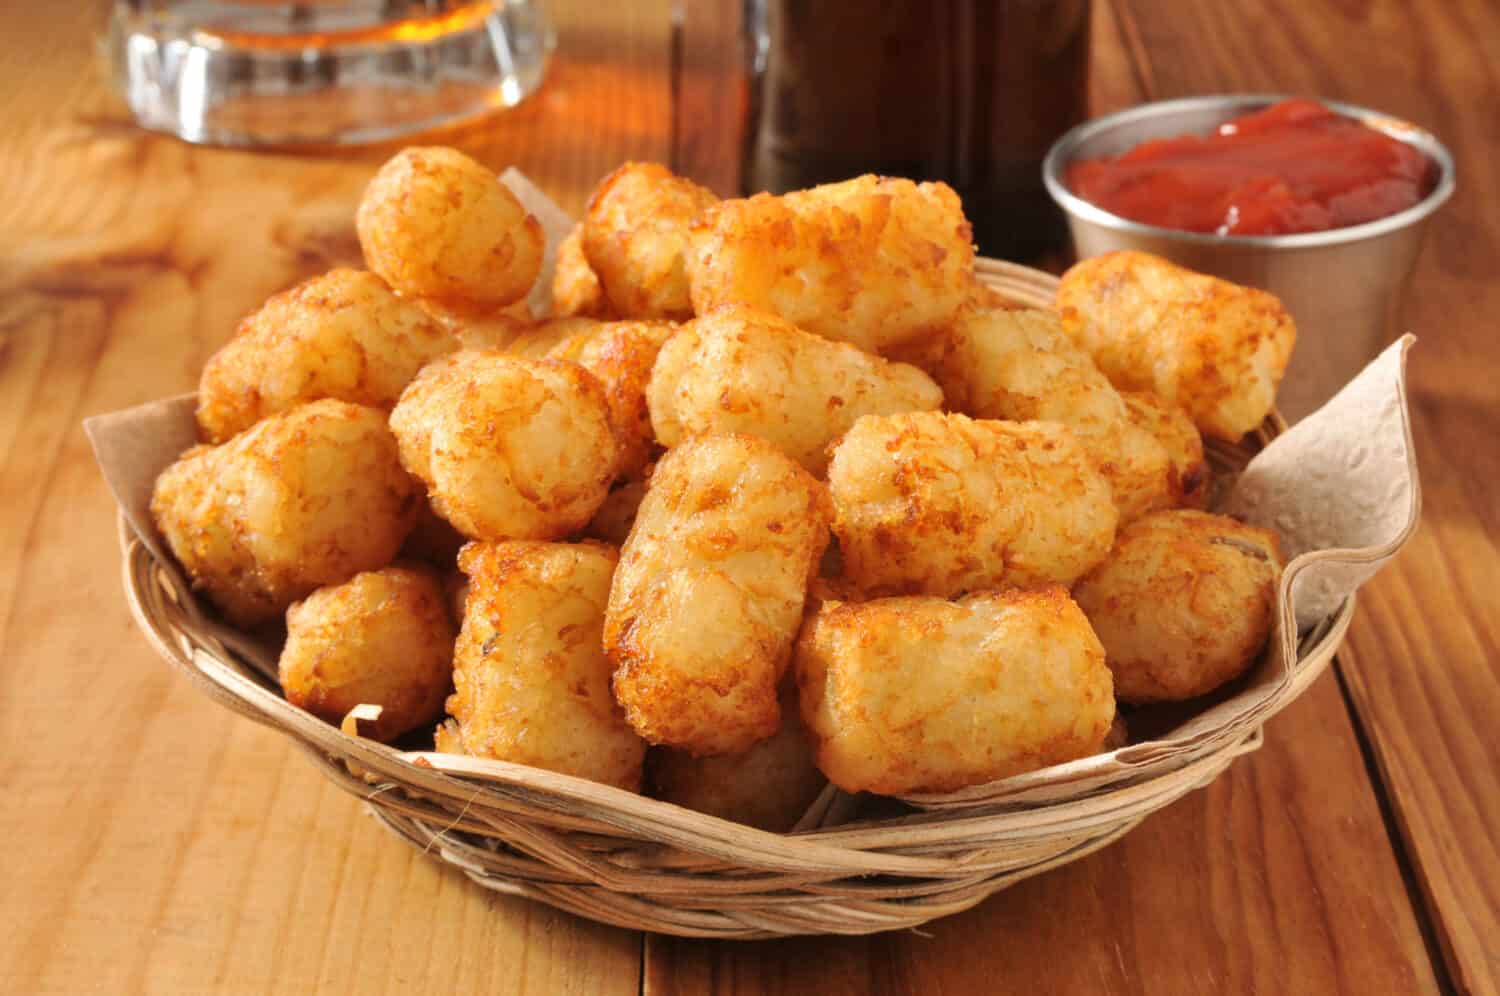 A basket of golden tater tots with beer in the background